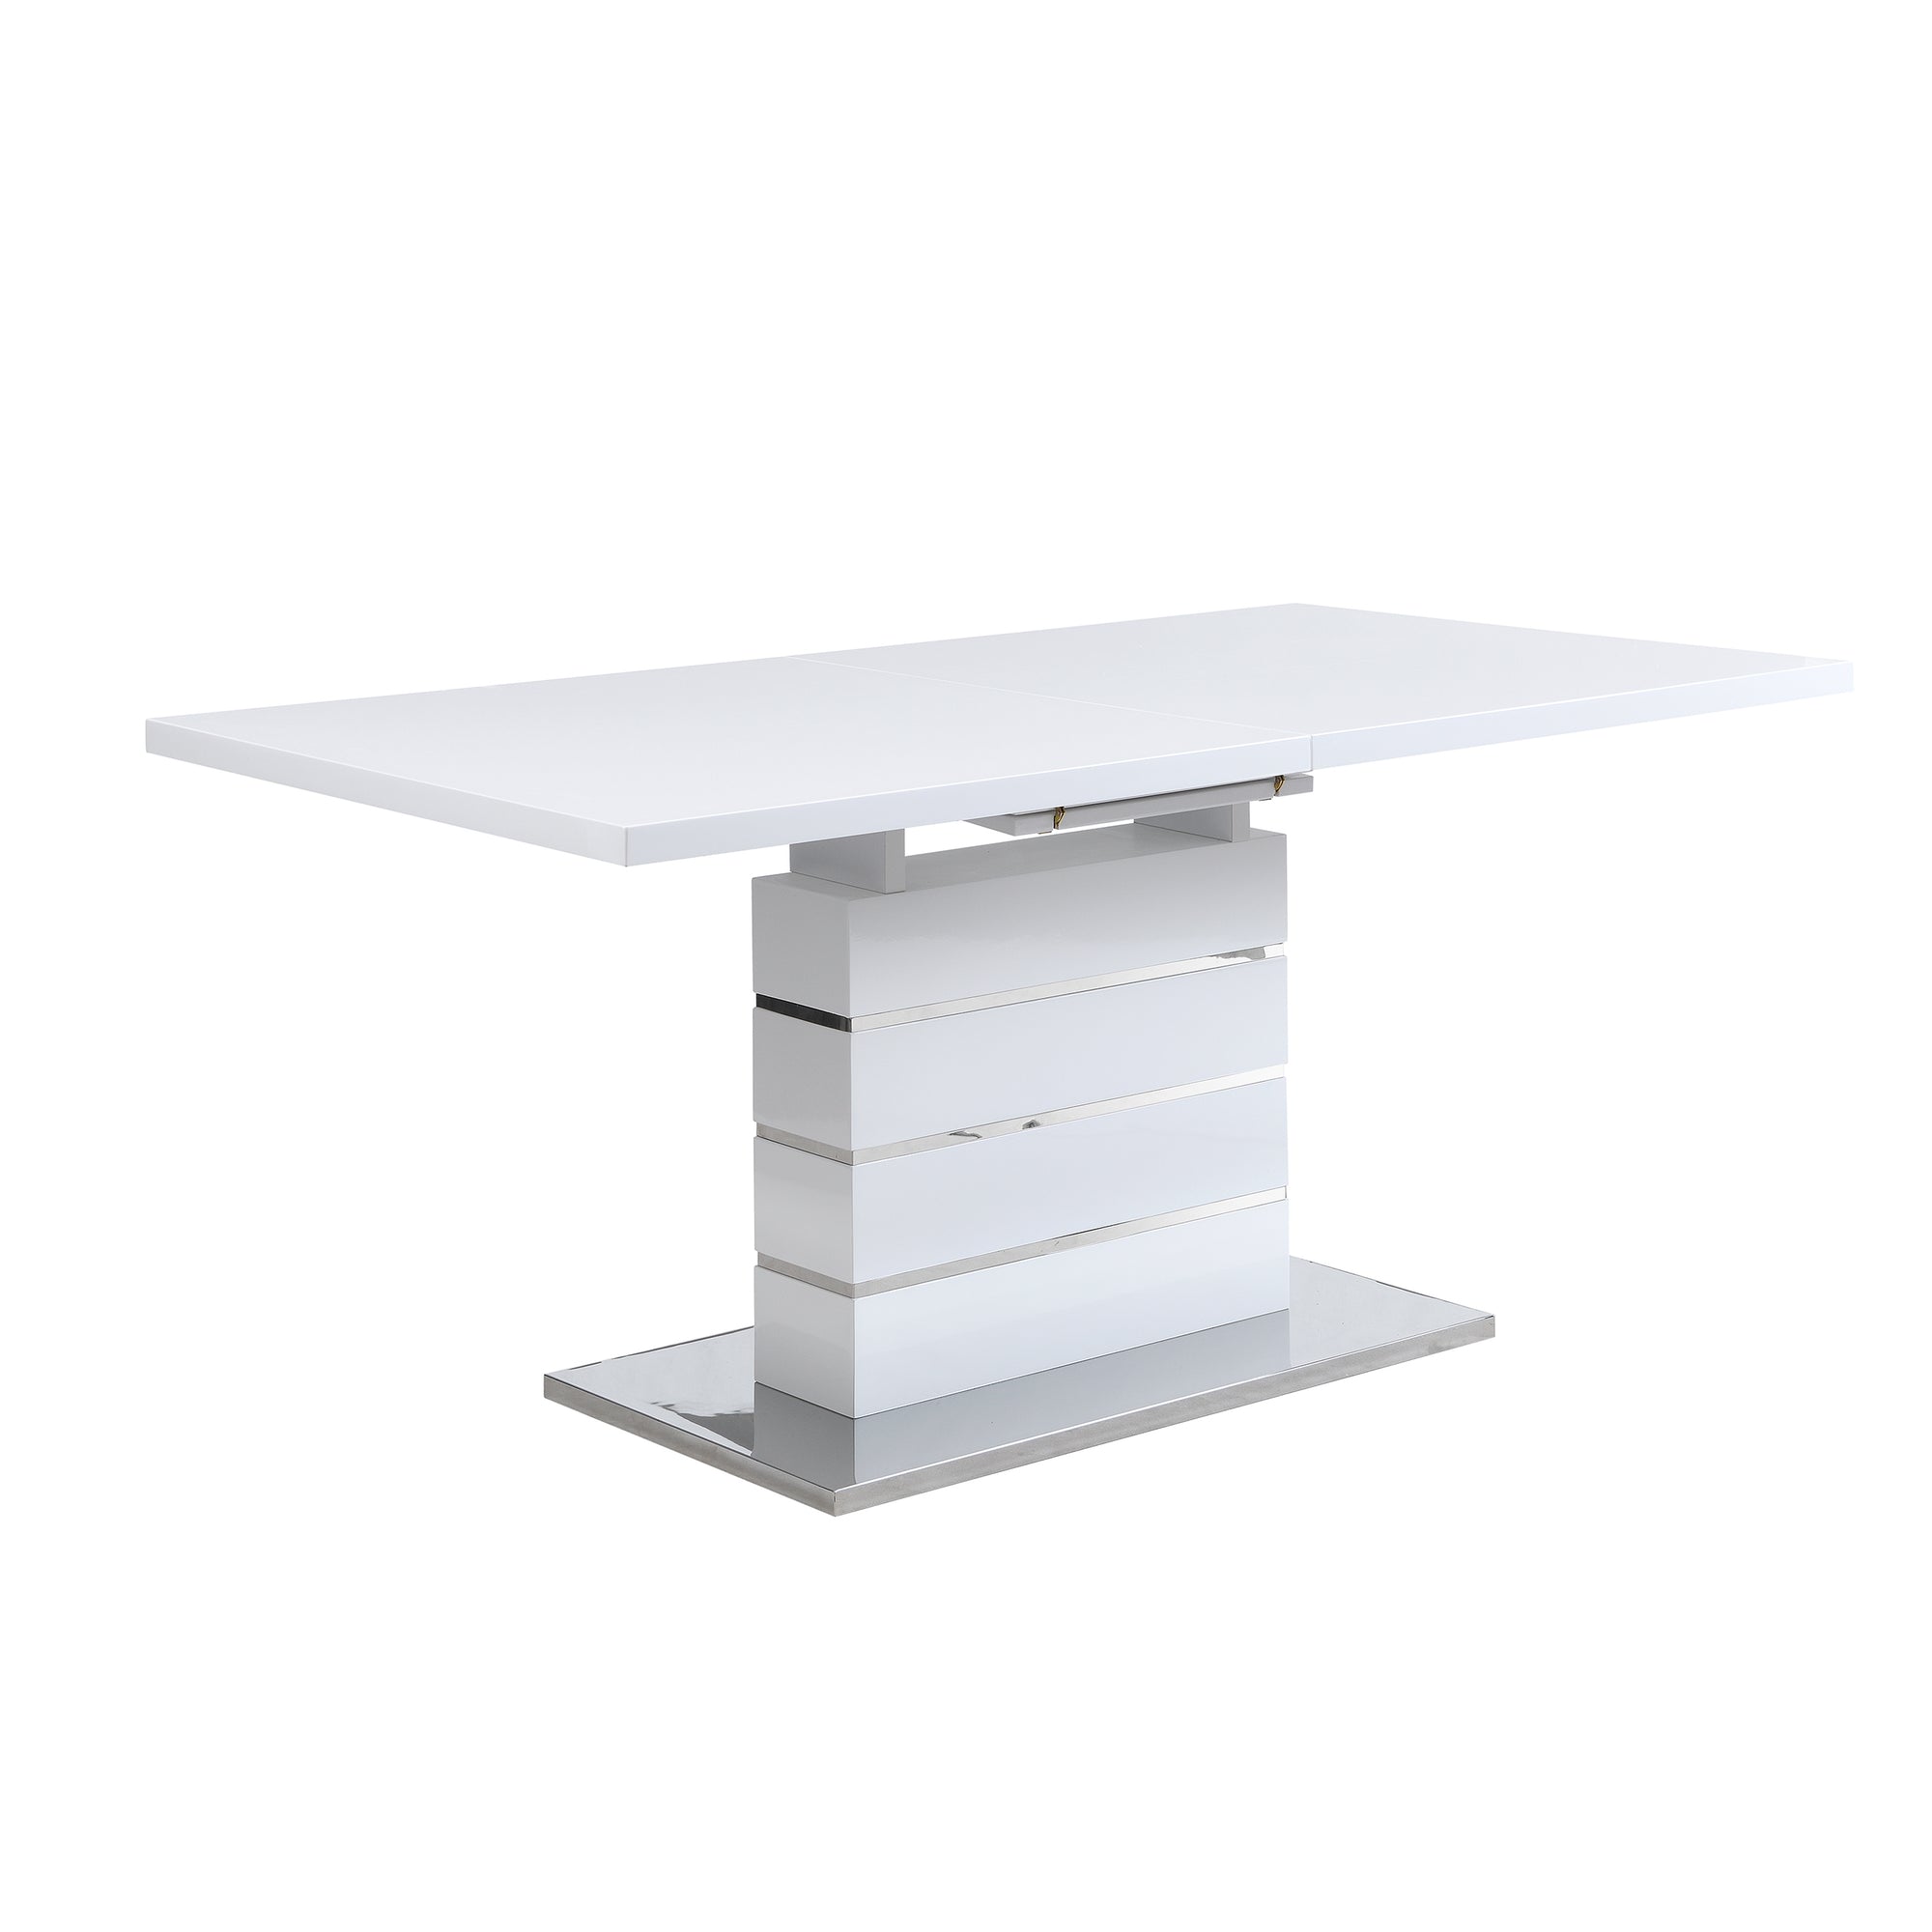 Hayne High Gloss White Extending Dining Table 6 to 8 Seater